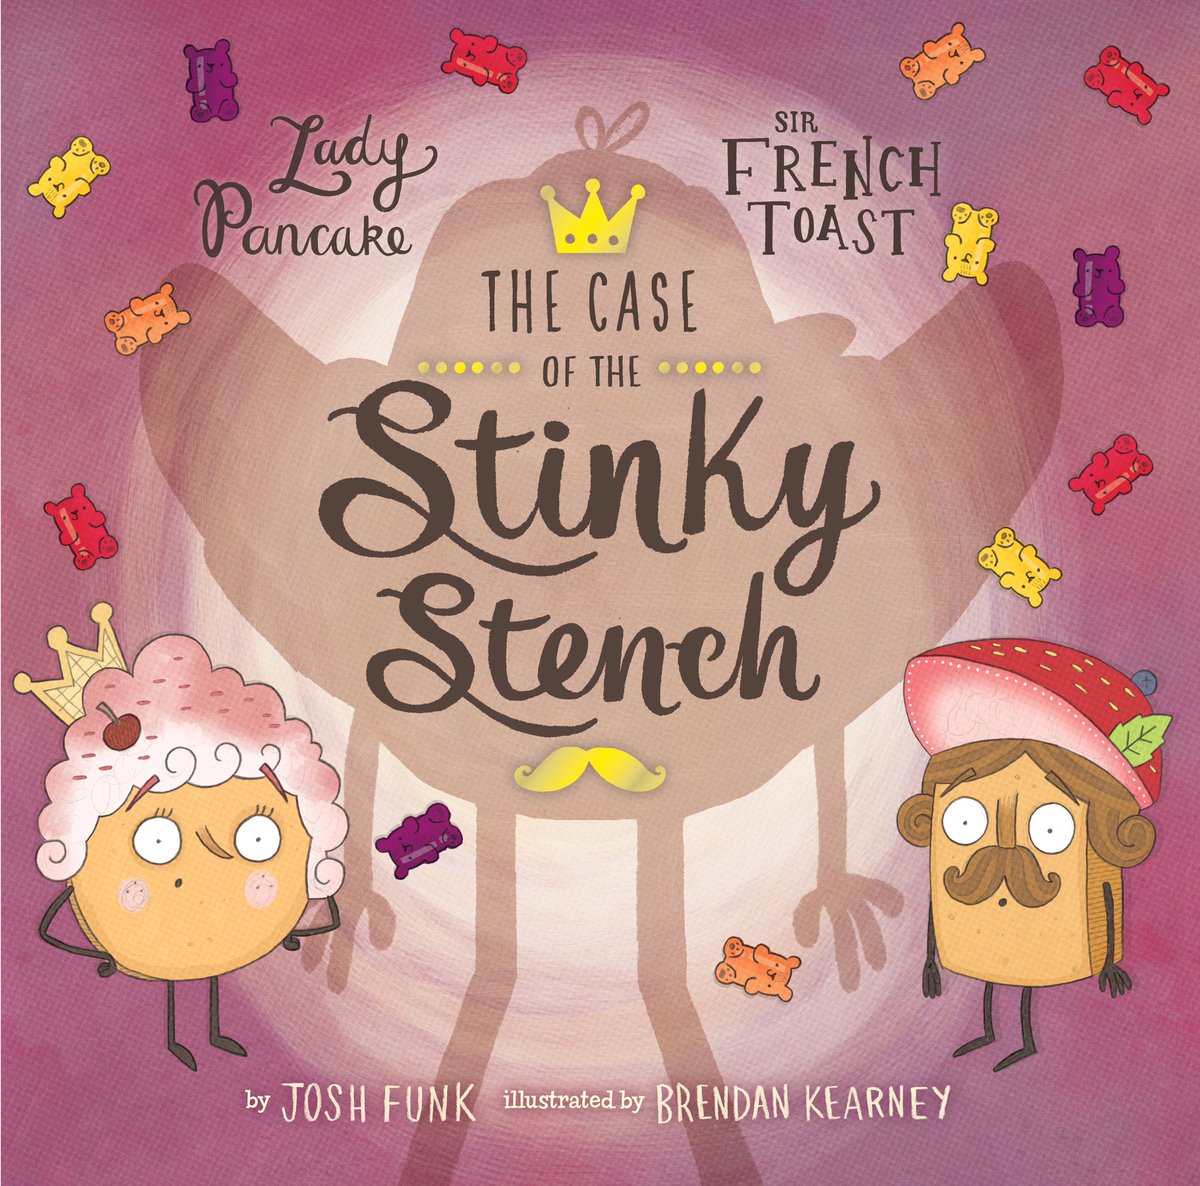 Coming on May 2, 2017: THE CASE OF THE STINKY STENCH (Lady Pancake & Sir French Toast 2)